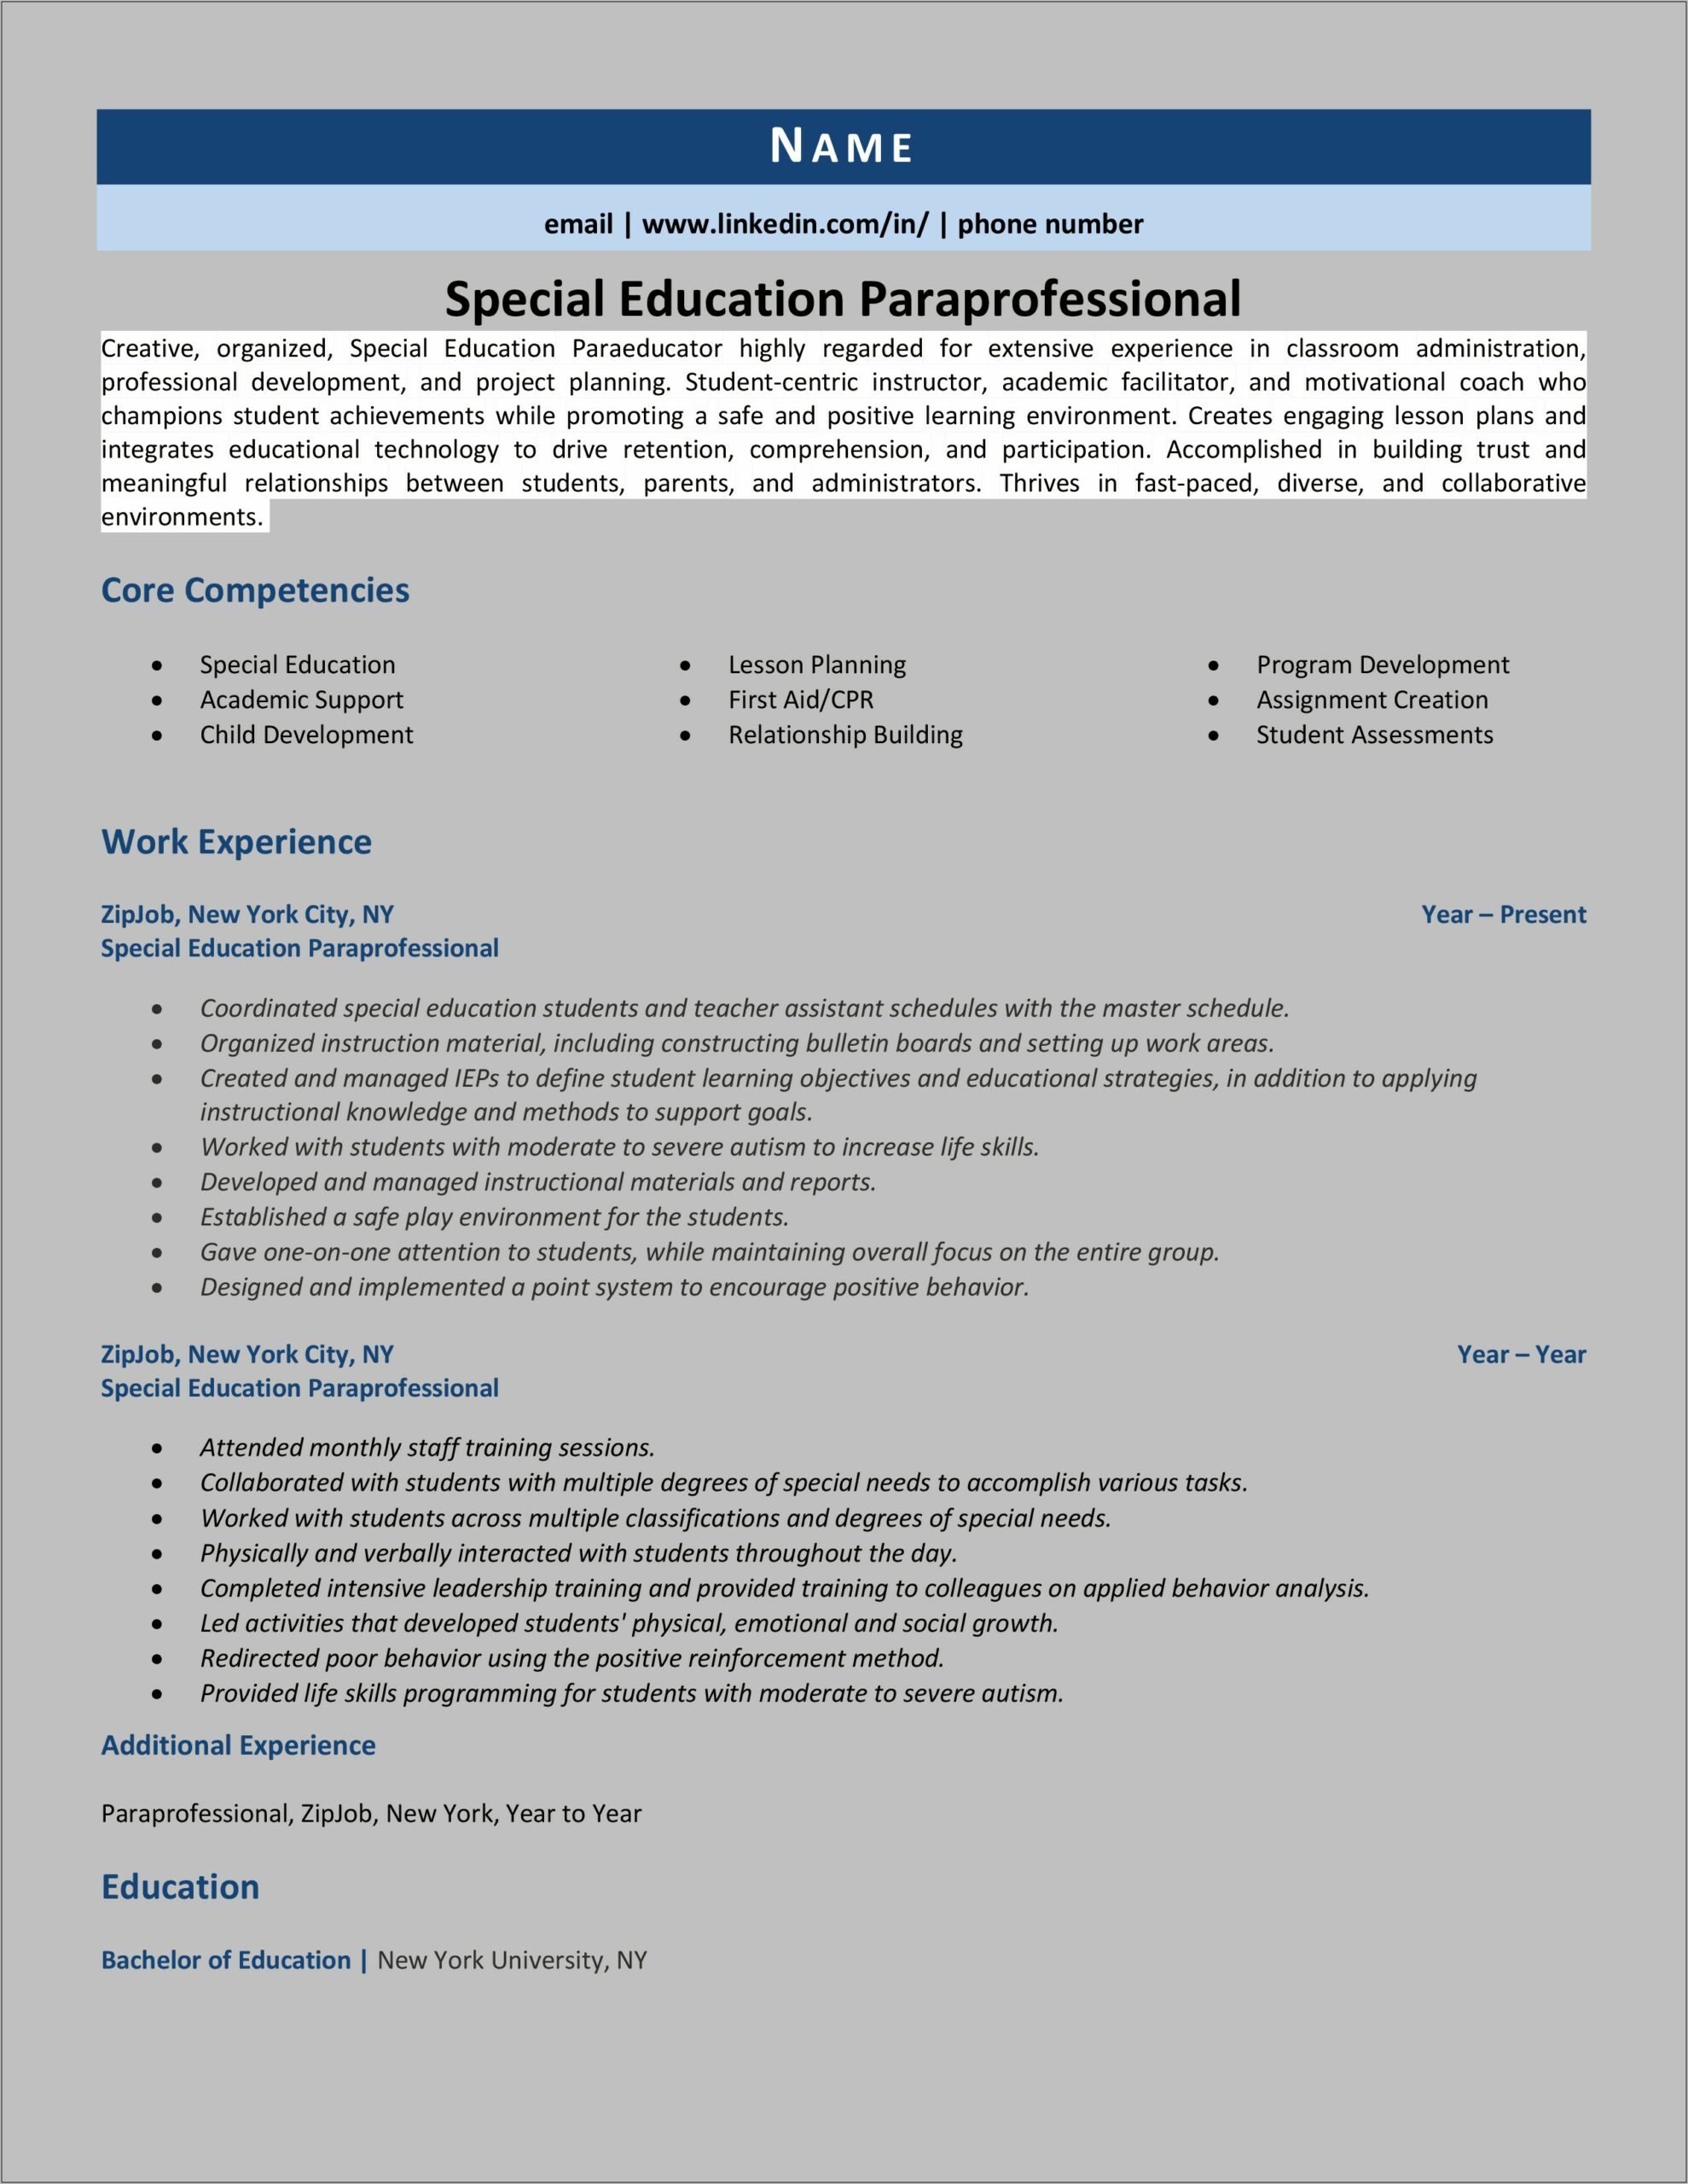 Examples Of Special Education Resumes